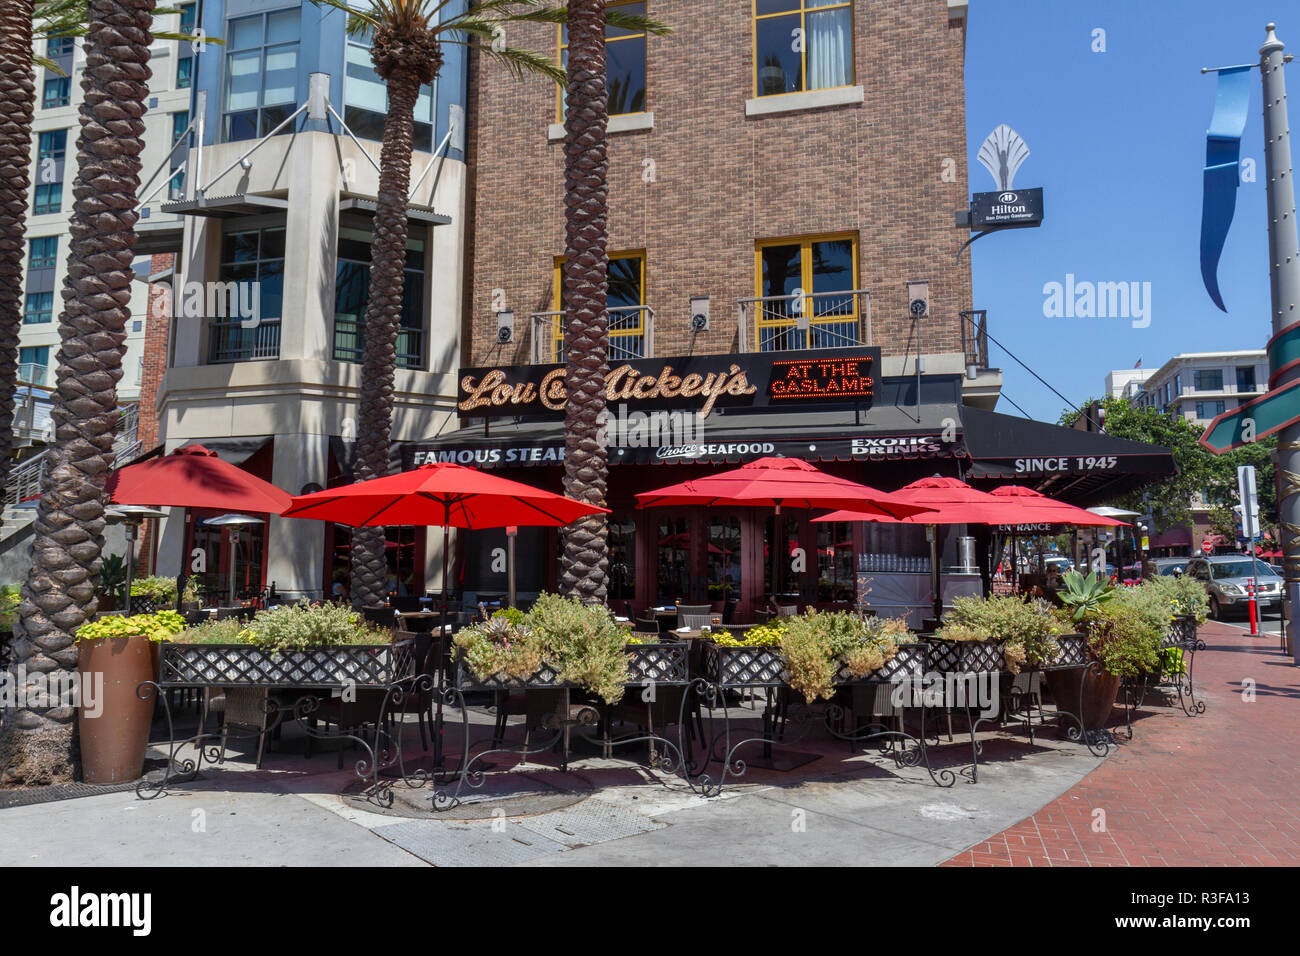 Lou & Mickey's at the Gaslamp in downtown San Diego, California, United States. Stock Photo